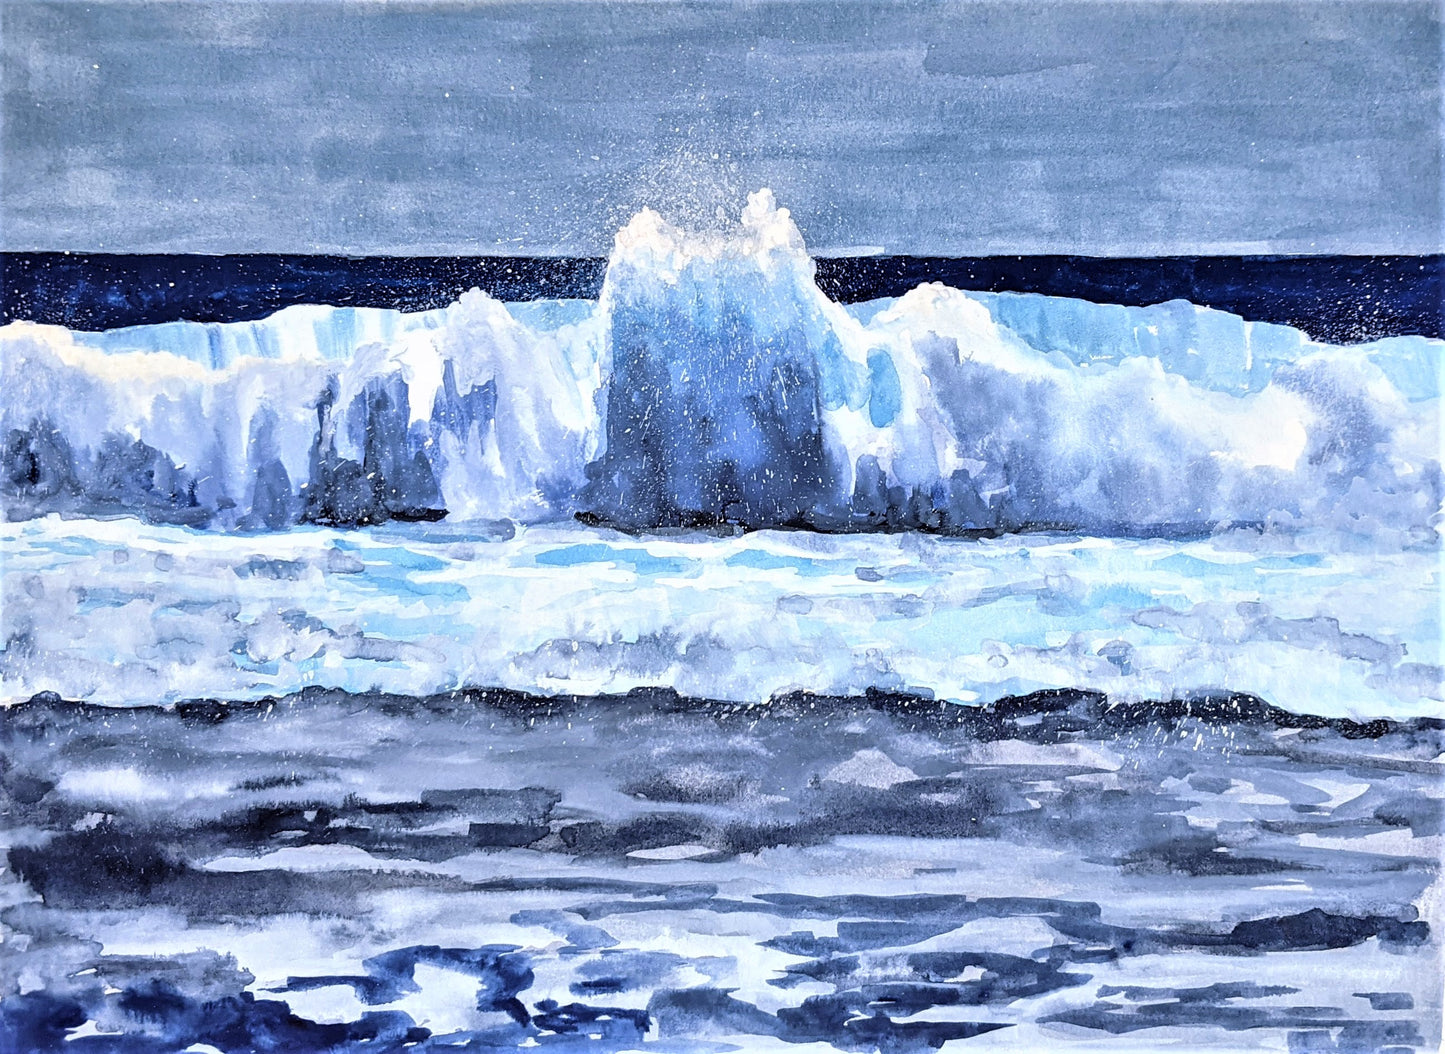 Catch a Wave gouache painting on paper